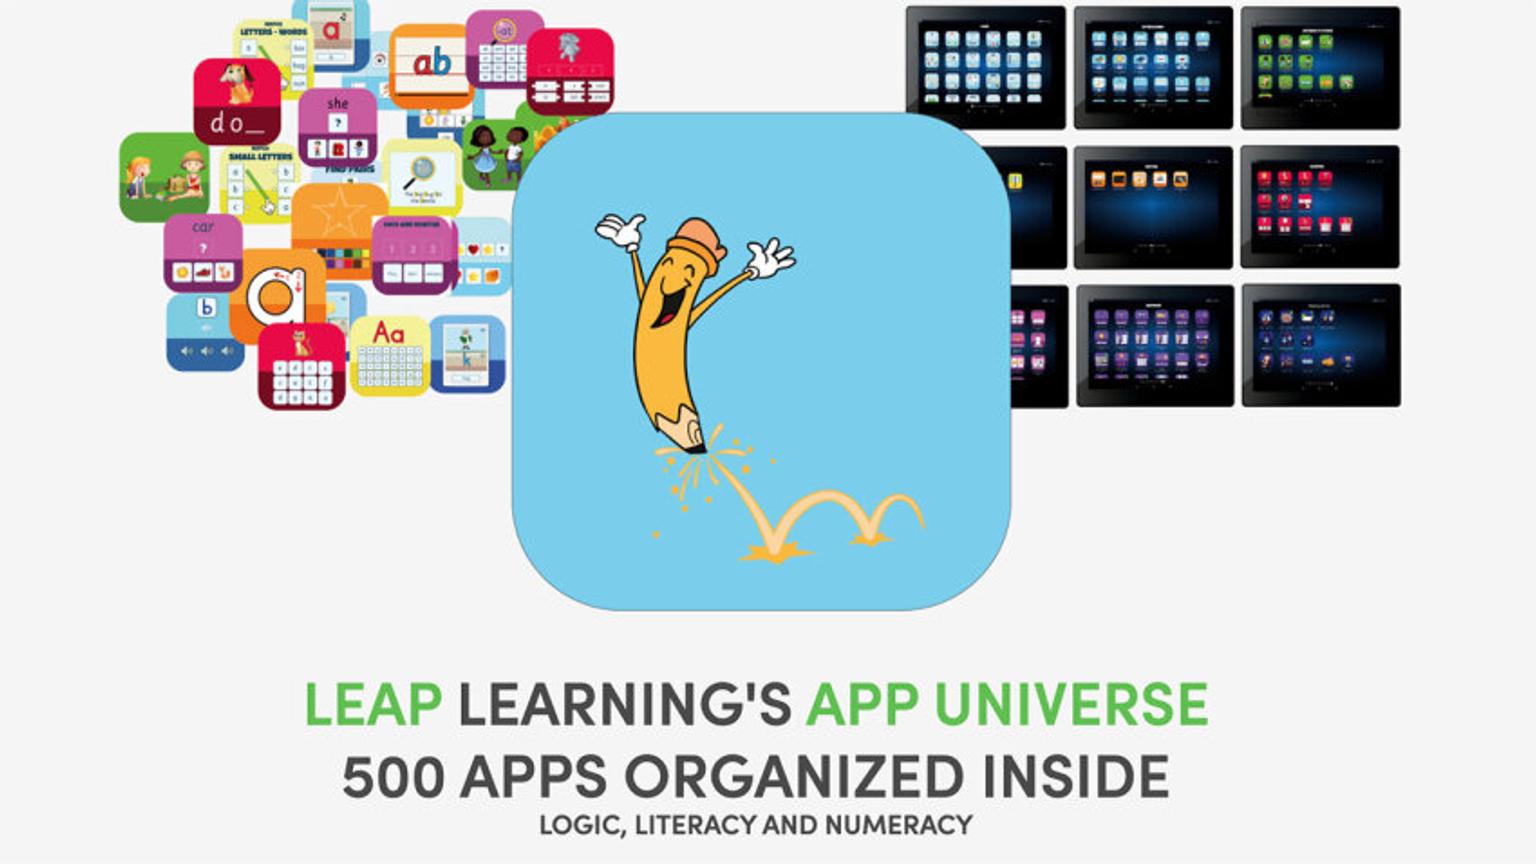 An illustration of the Leap Learning app